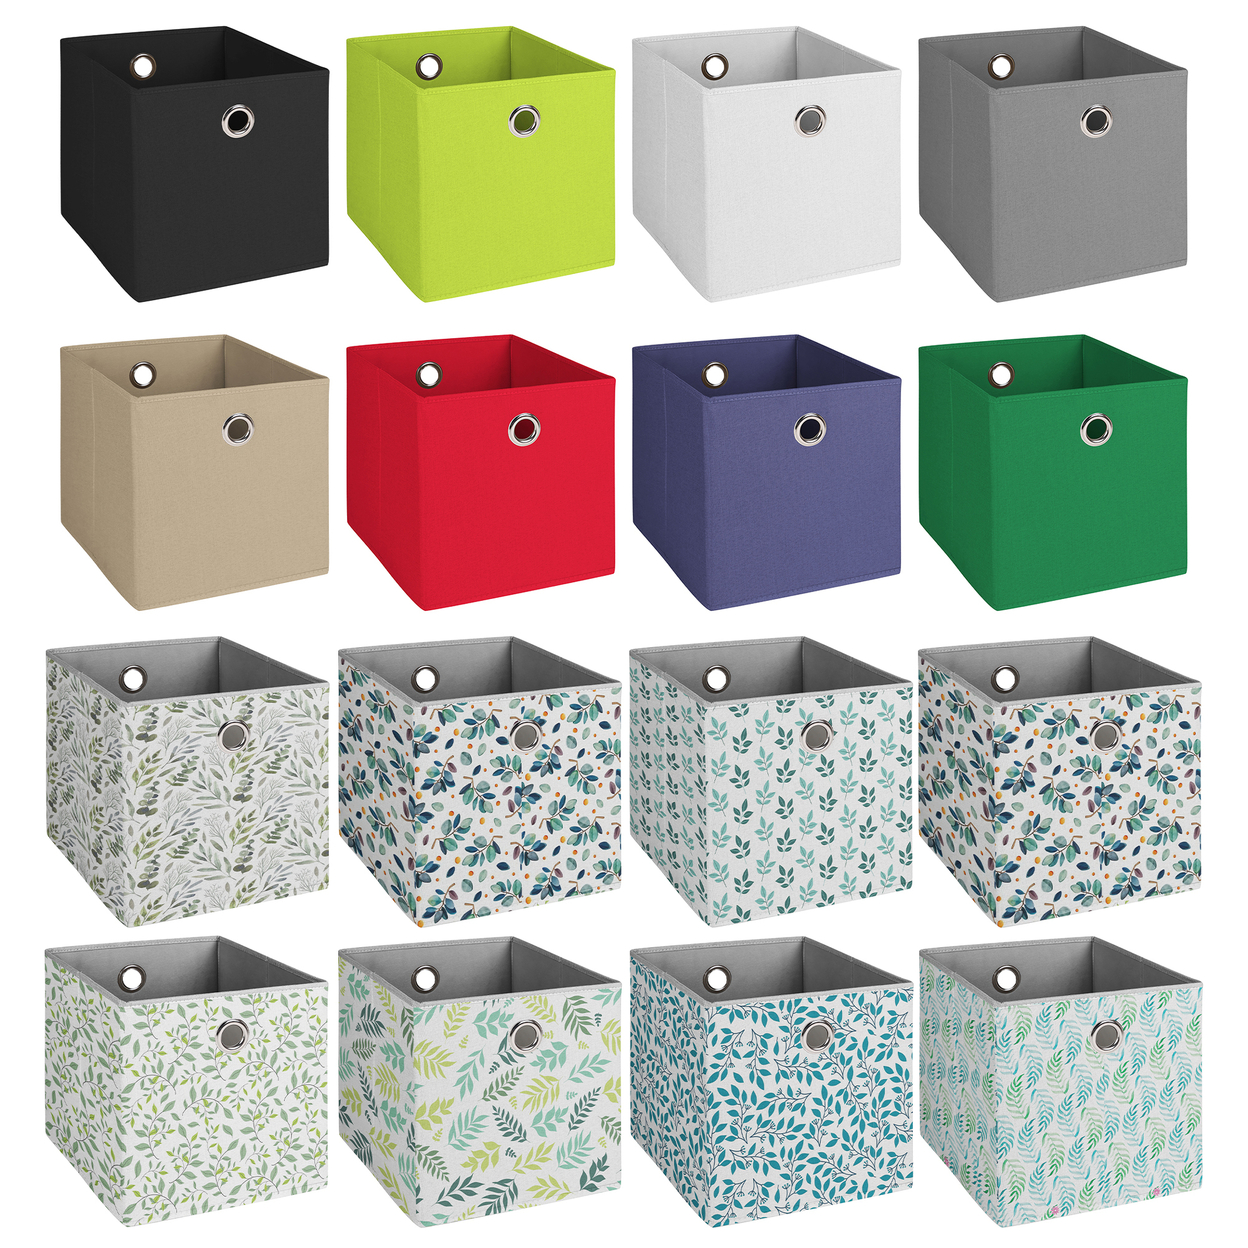 Multipurpose Stackable Basic Fabric Collapsible Storage Bin Cube-Organizer - Solid